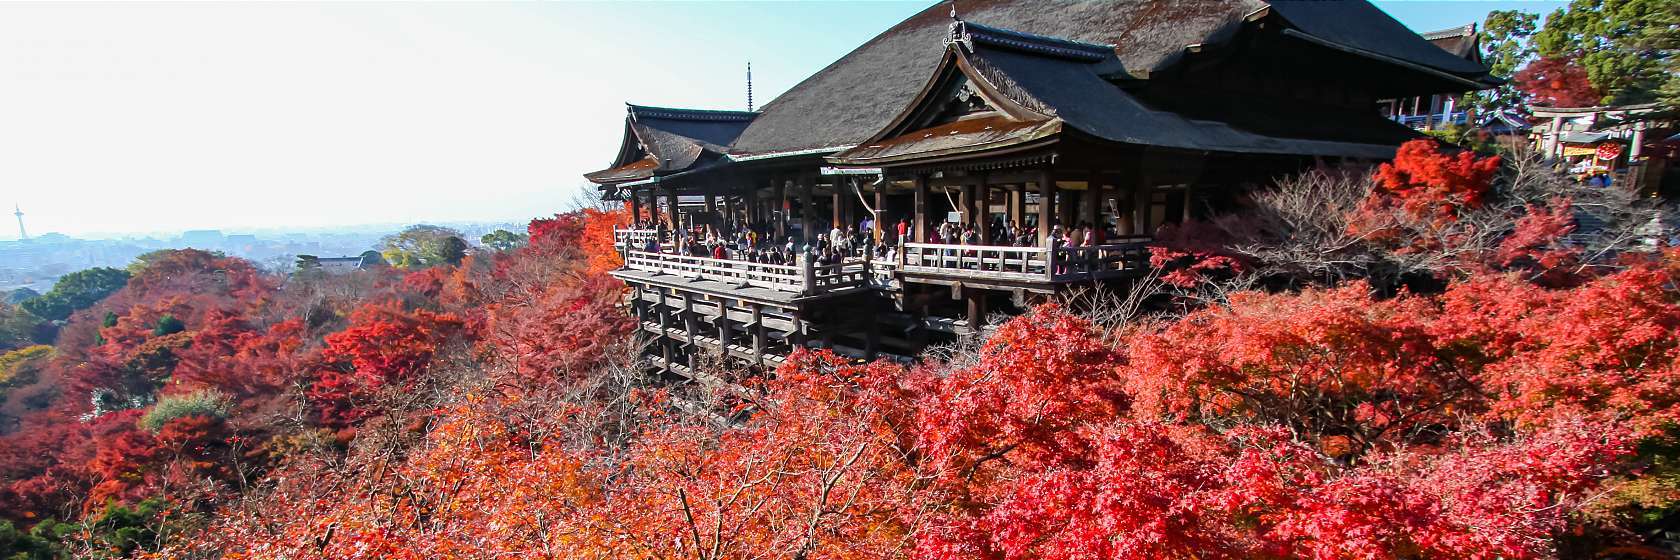 Kyoto Travel Guide - What to do in Kyoto City